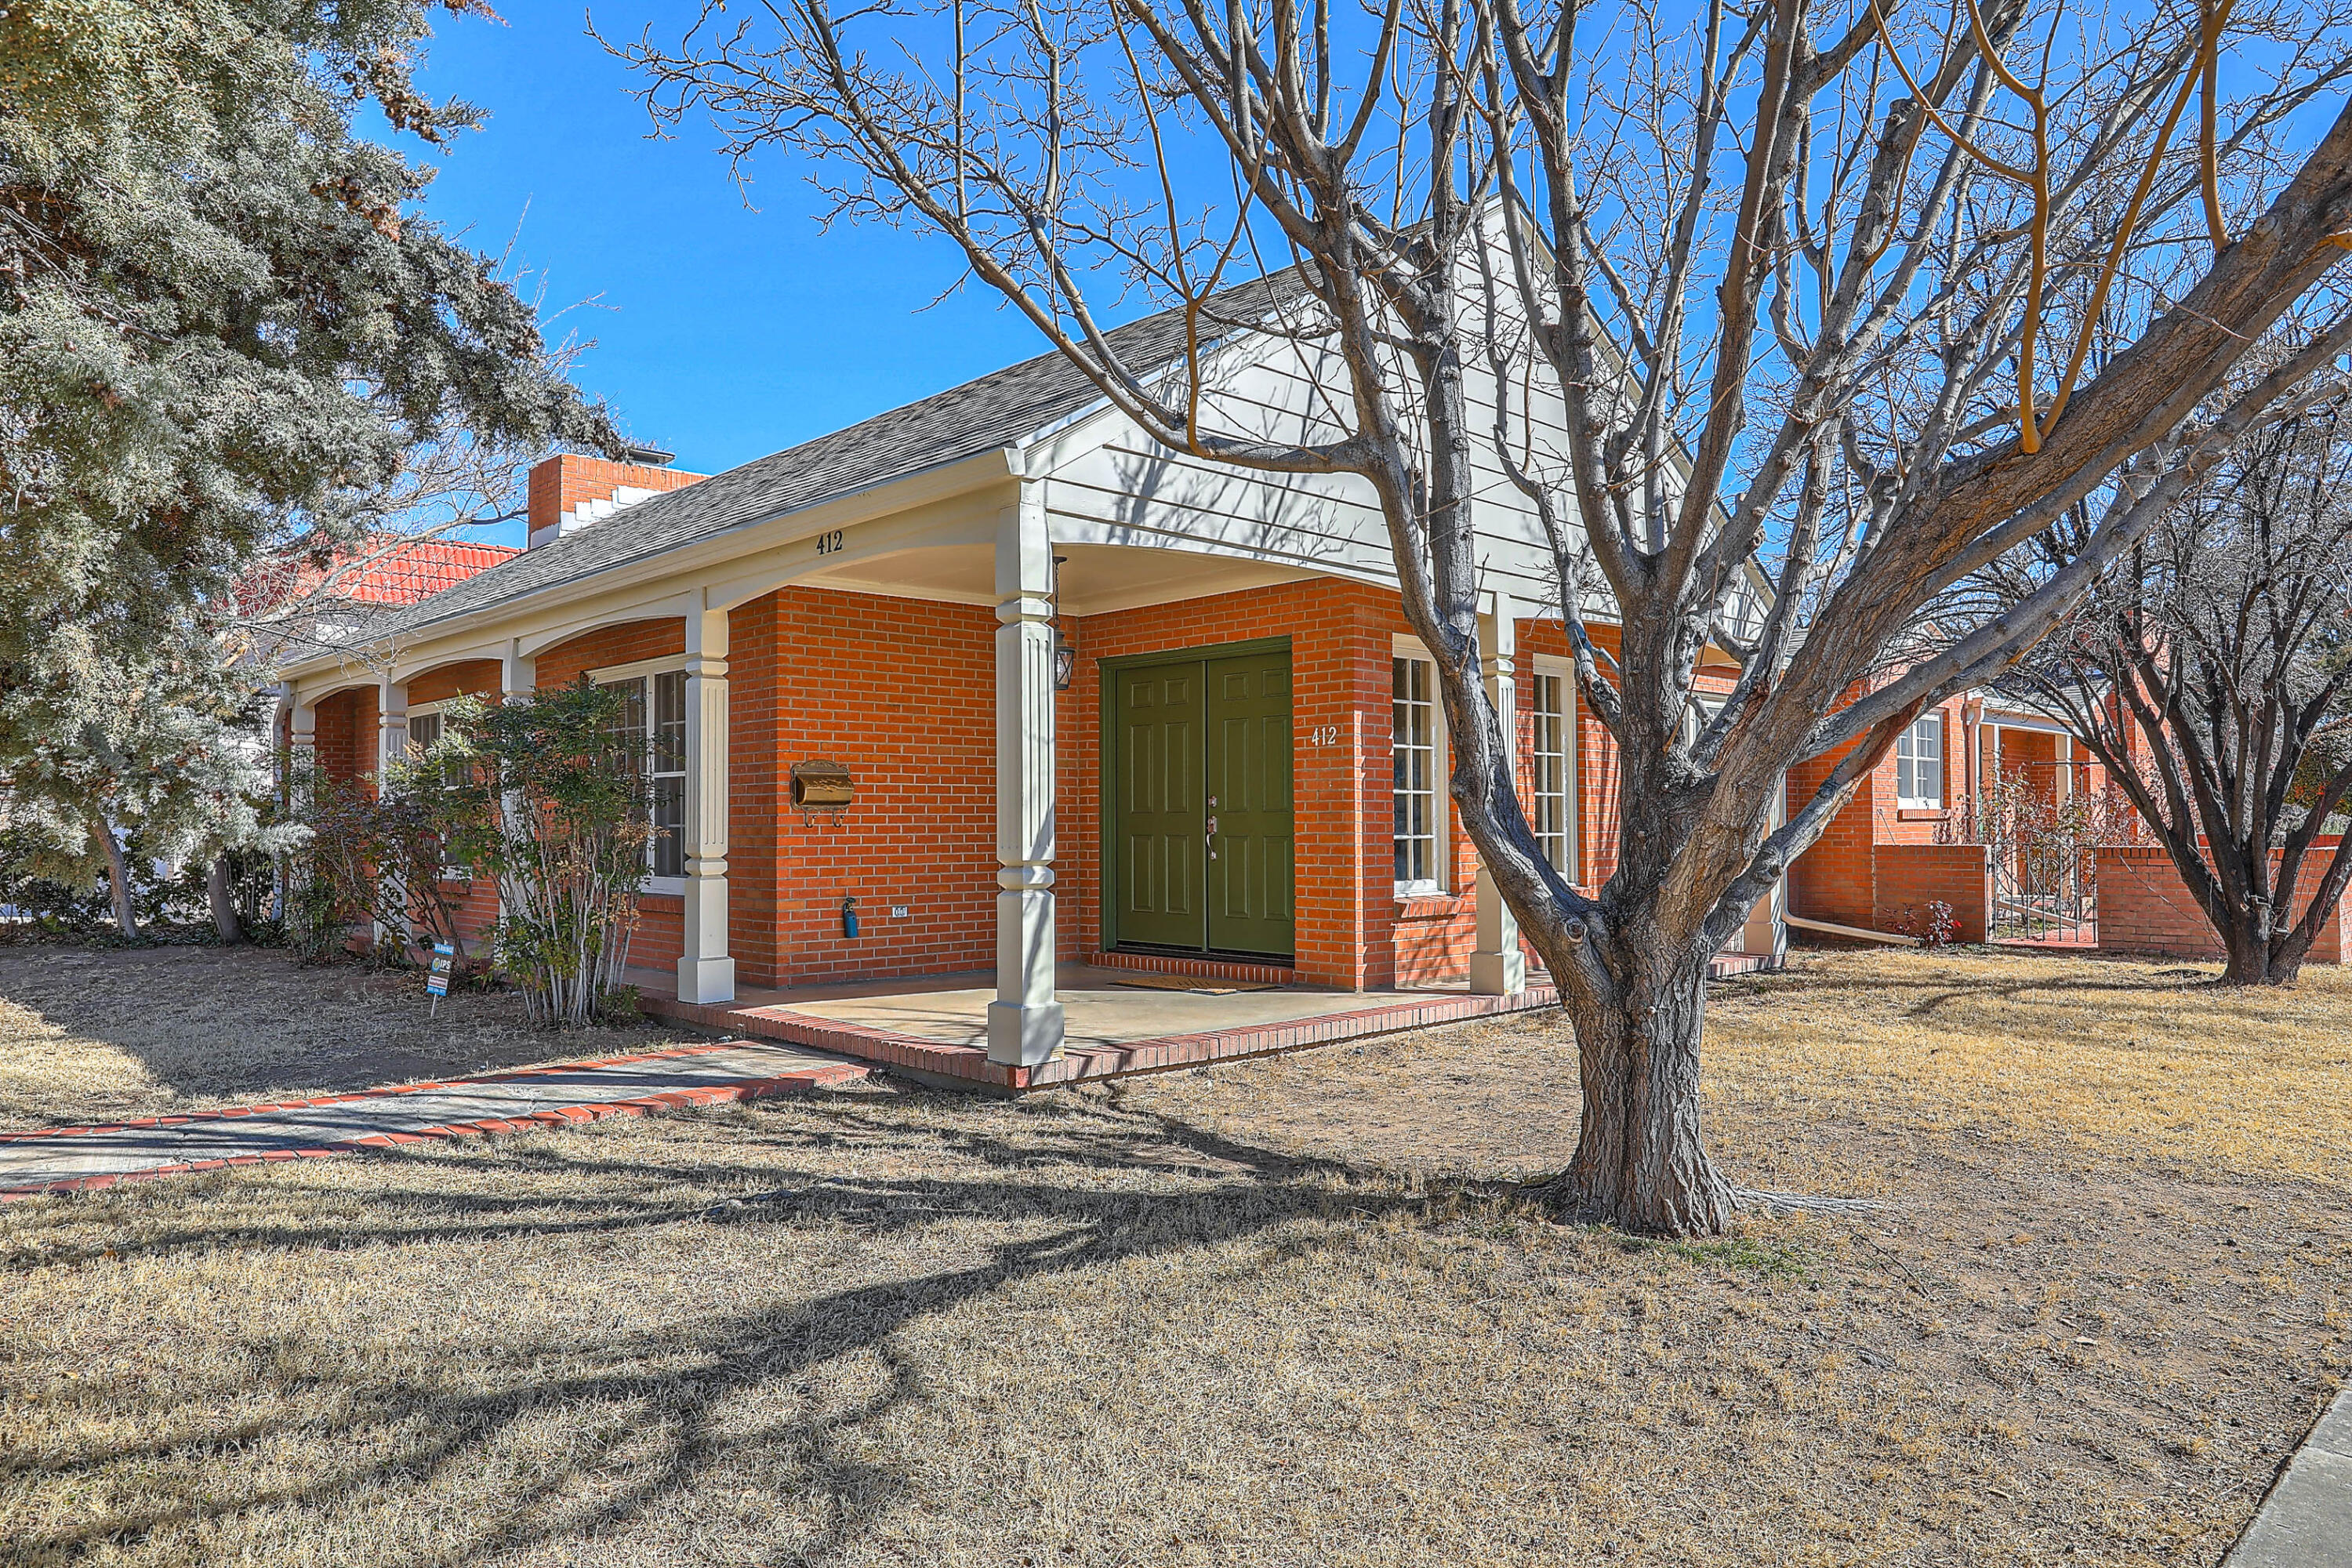 OPEN HOUSE SAT 12-3 & SUN 1 -4. Drive down a lovely tree-lined street in the heart of the Albuquerque Country Club neighborhood to 412 Laguna SW. This home was almost completely remodeled in 2022 - roof, plumbing, light fixtures, electrical, kitchen, bathrooms, flooring, garage door and more. Seller also added personal touches such as high end art gallery quality lighting, a wood door from a church in Spain and a gorgeous cast iron/porcelain bathtub from Portugal. There are even plans for a studio above the garage.